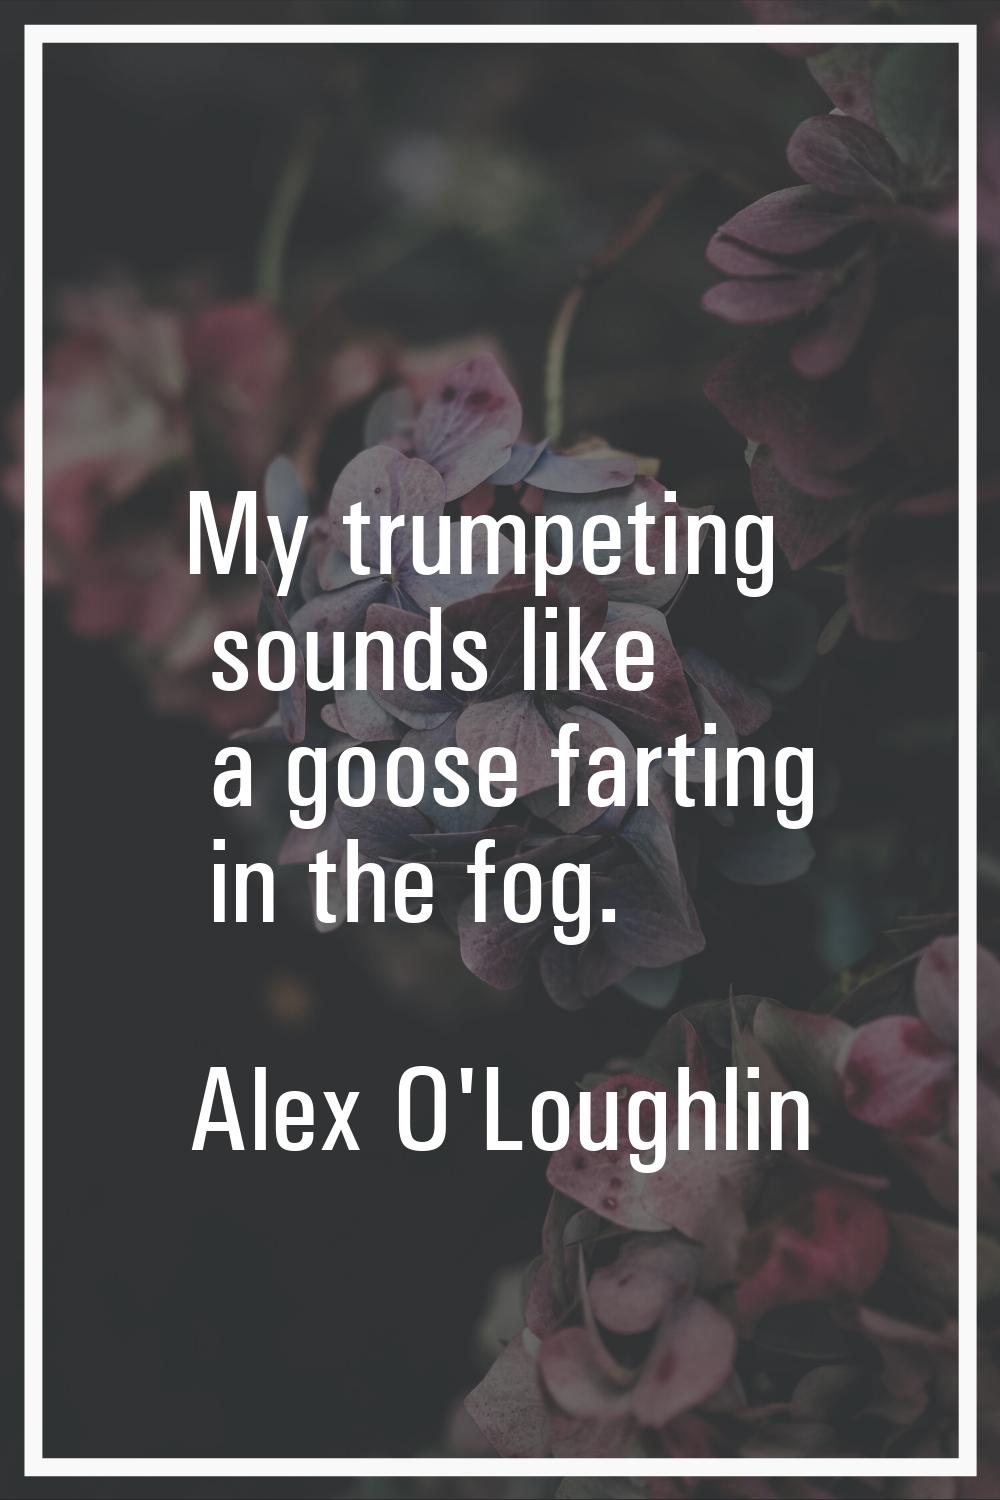 My trumpeting sounds like a goose farting in the fog.